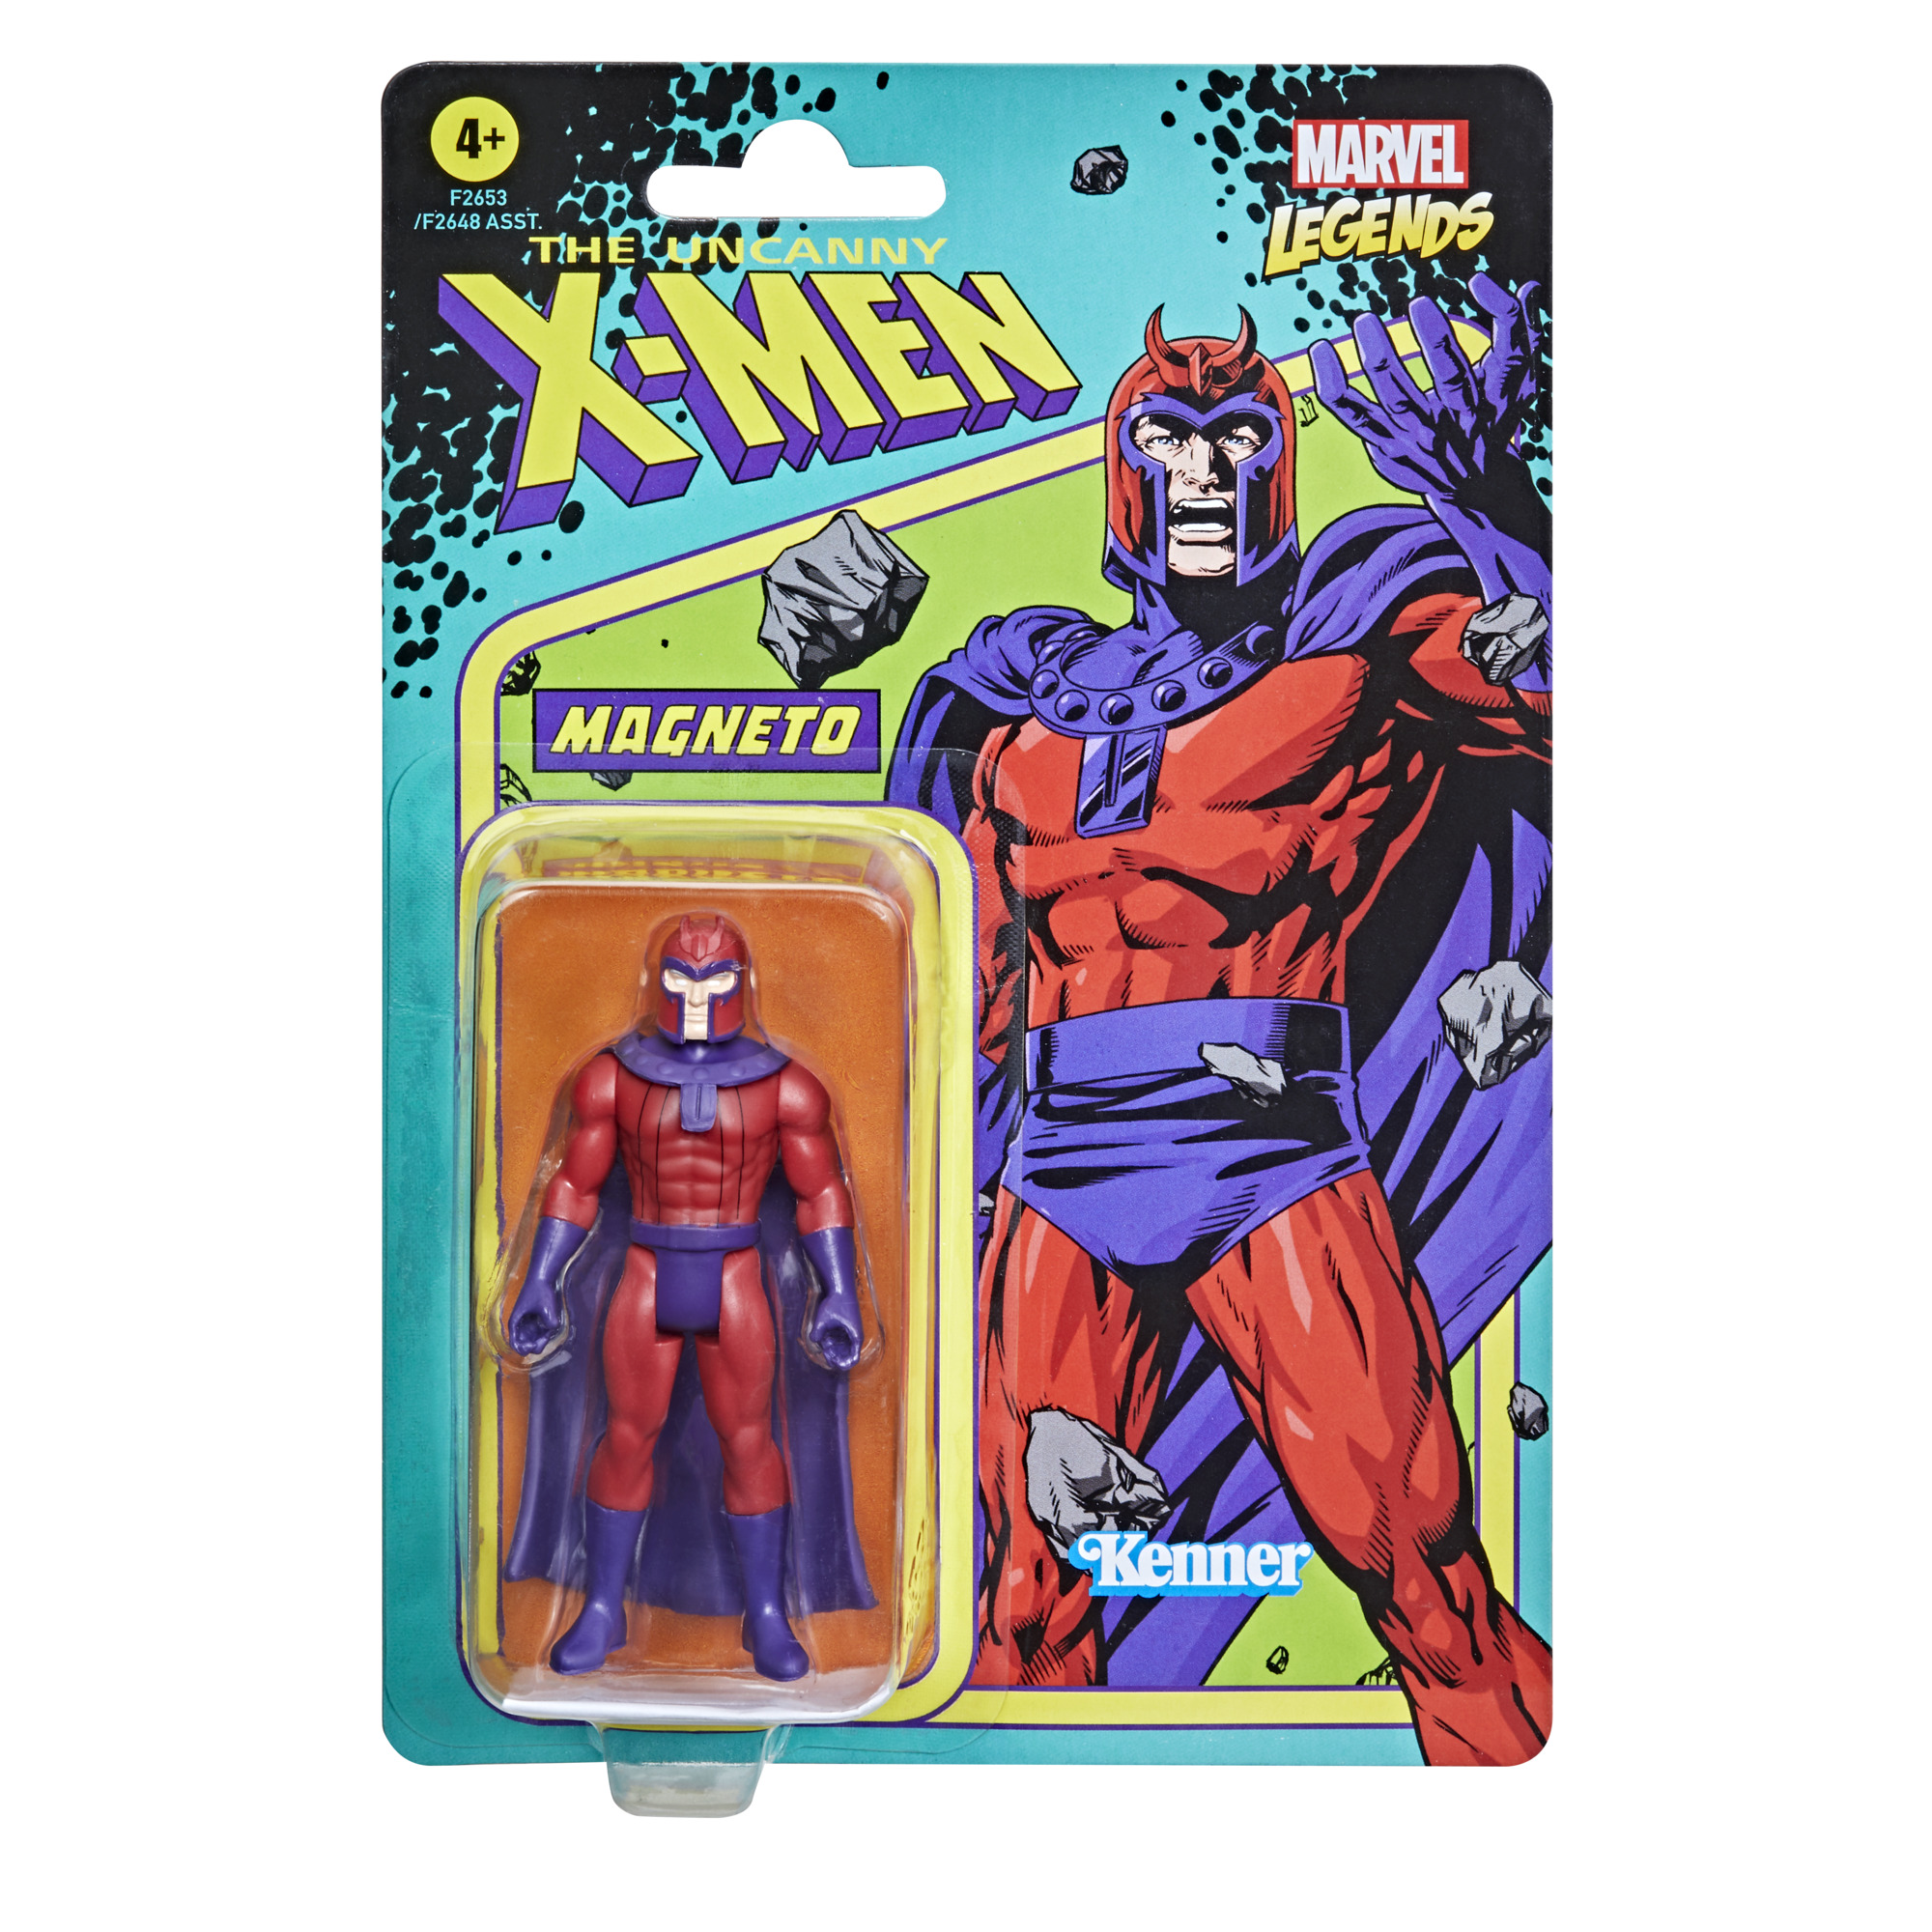 Magneto carded